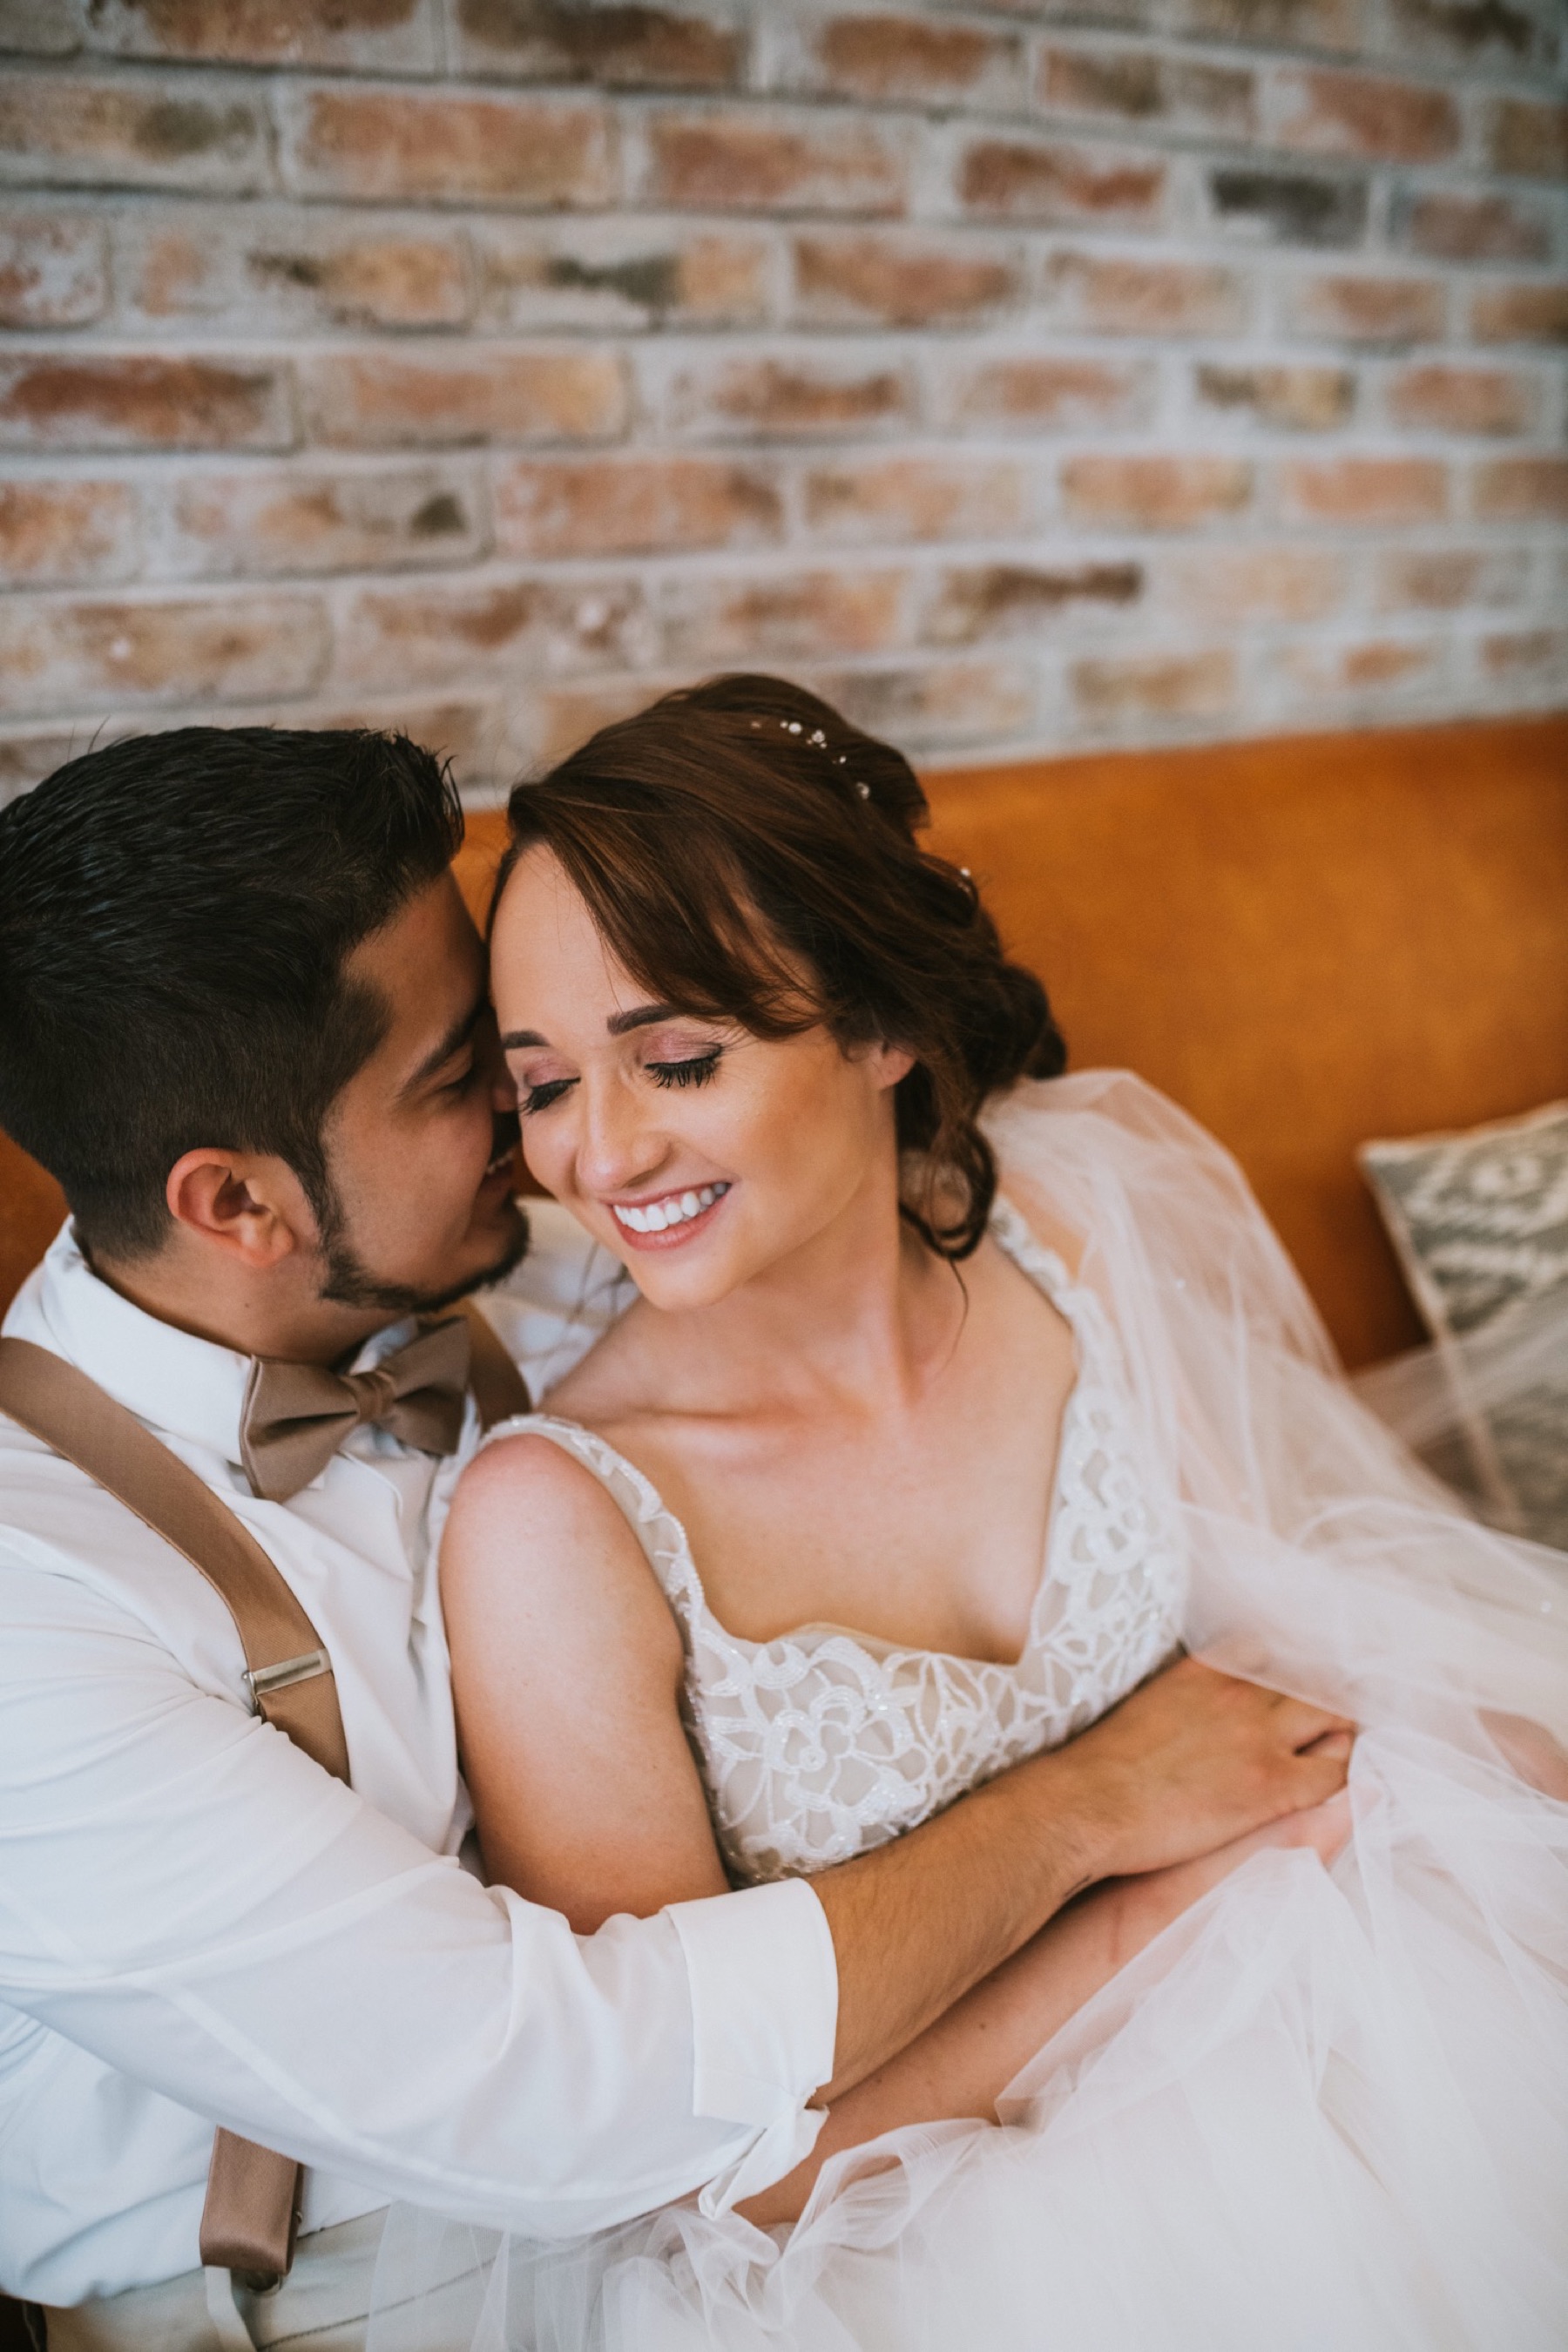 Bride and groom sitting on orange leather couch snuggling